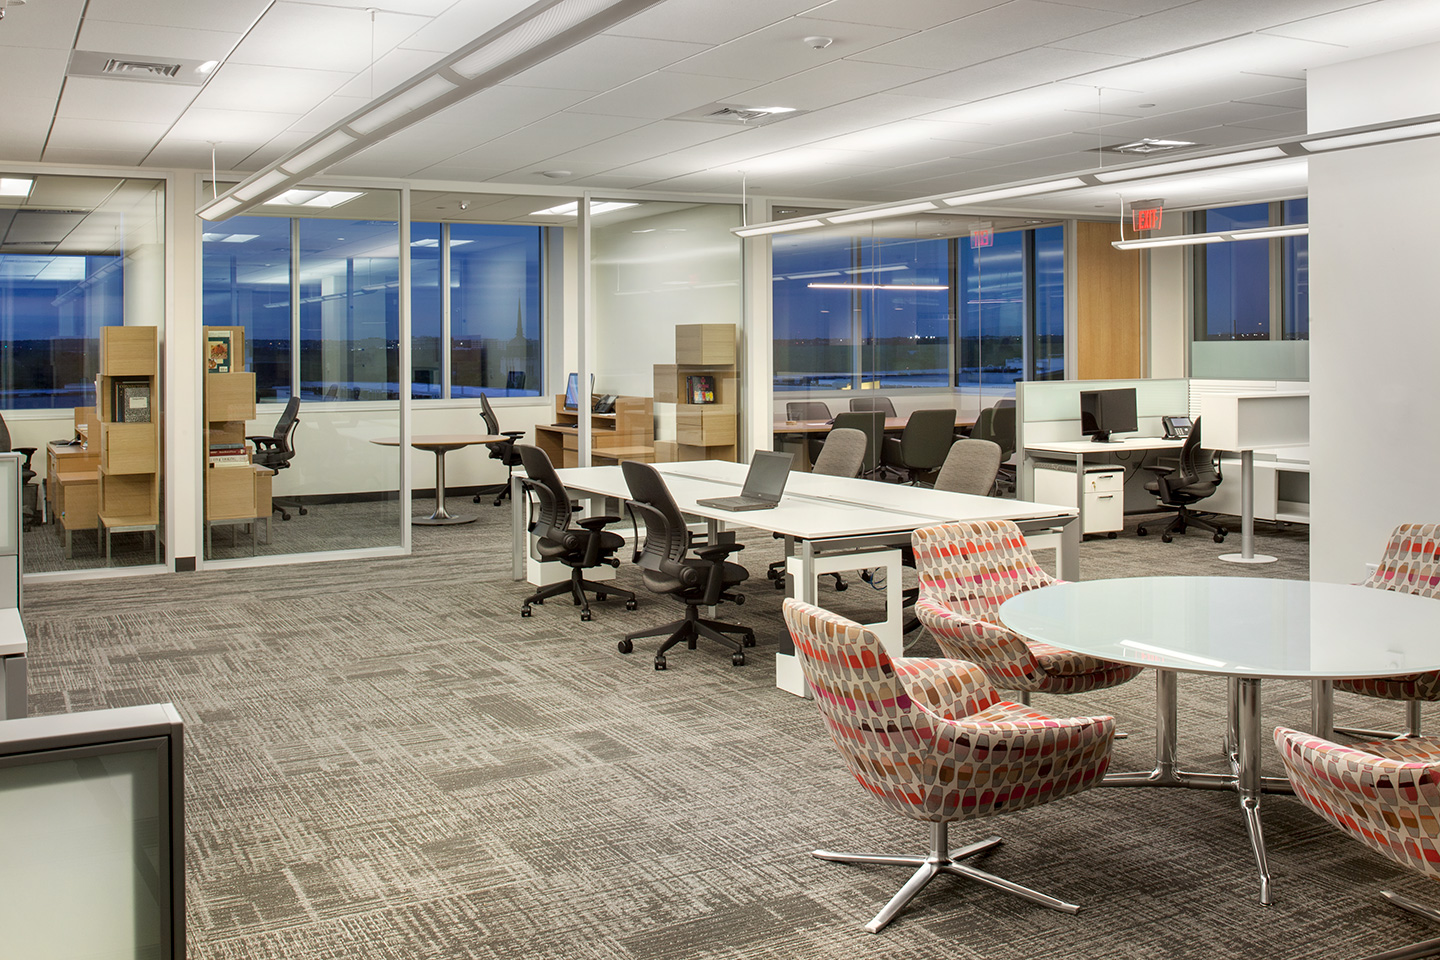 Office space with cubicles and diverses seating options.